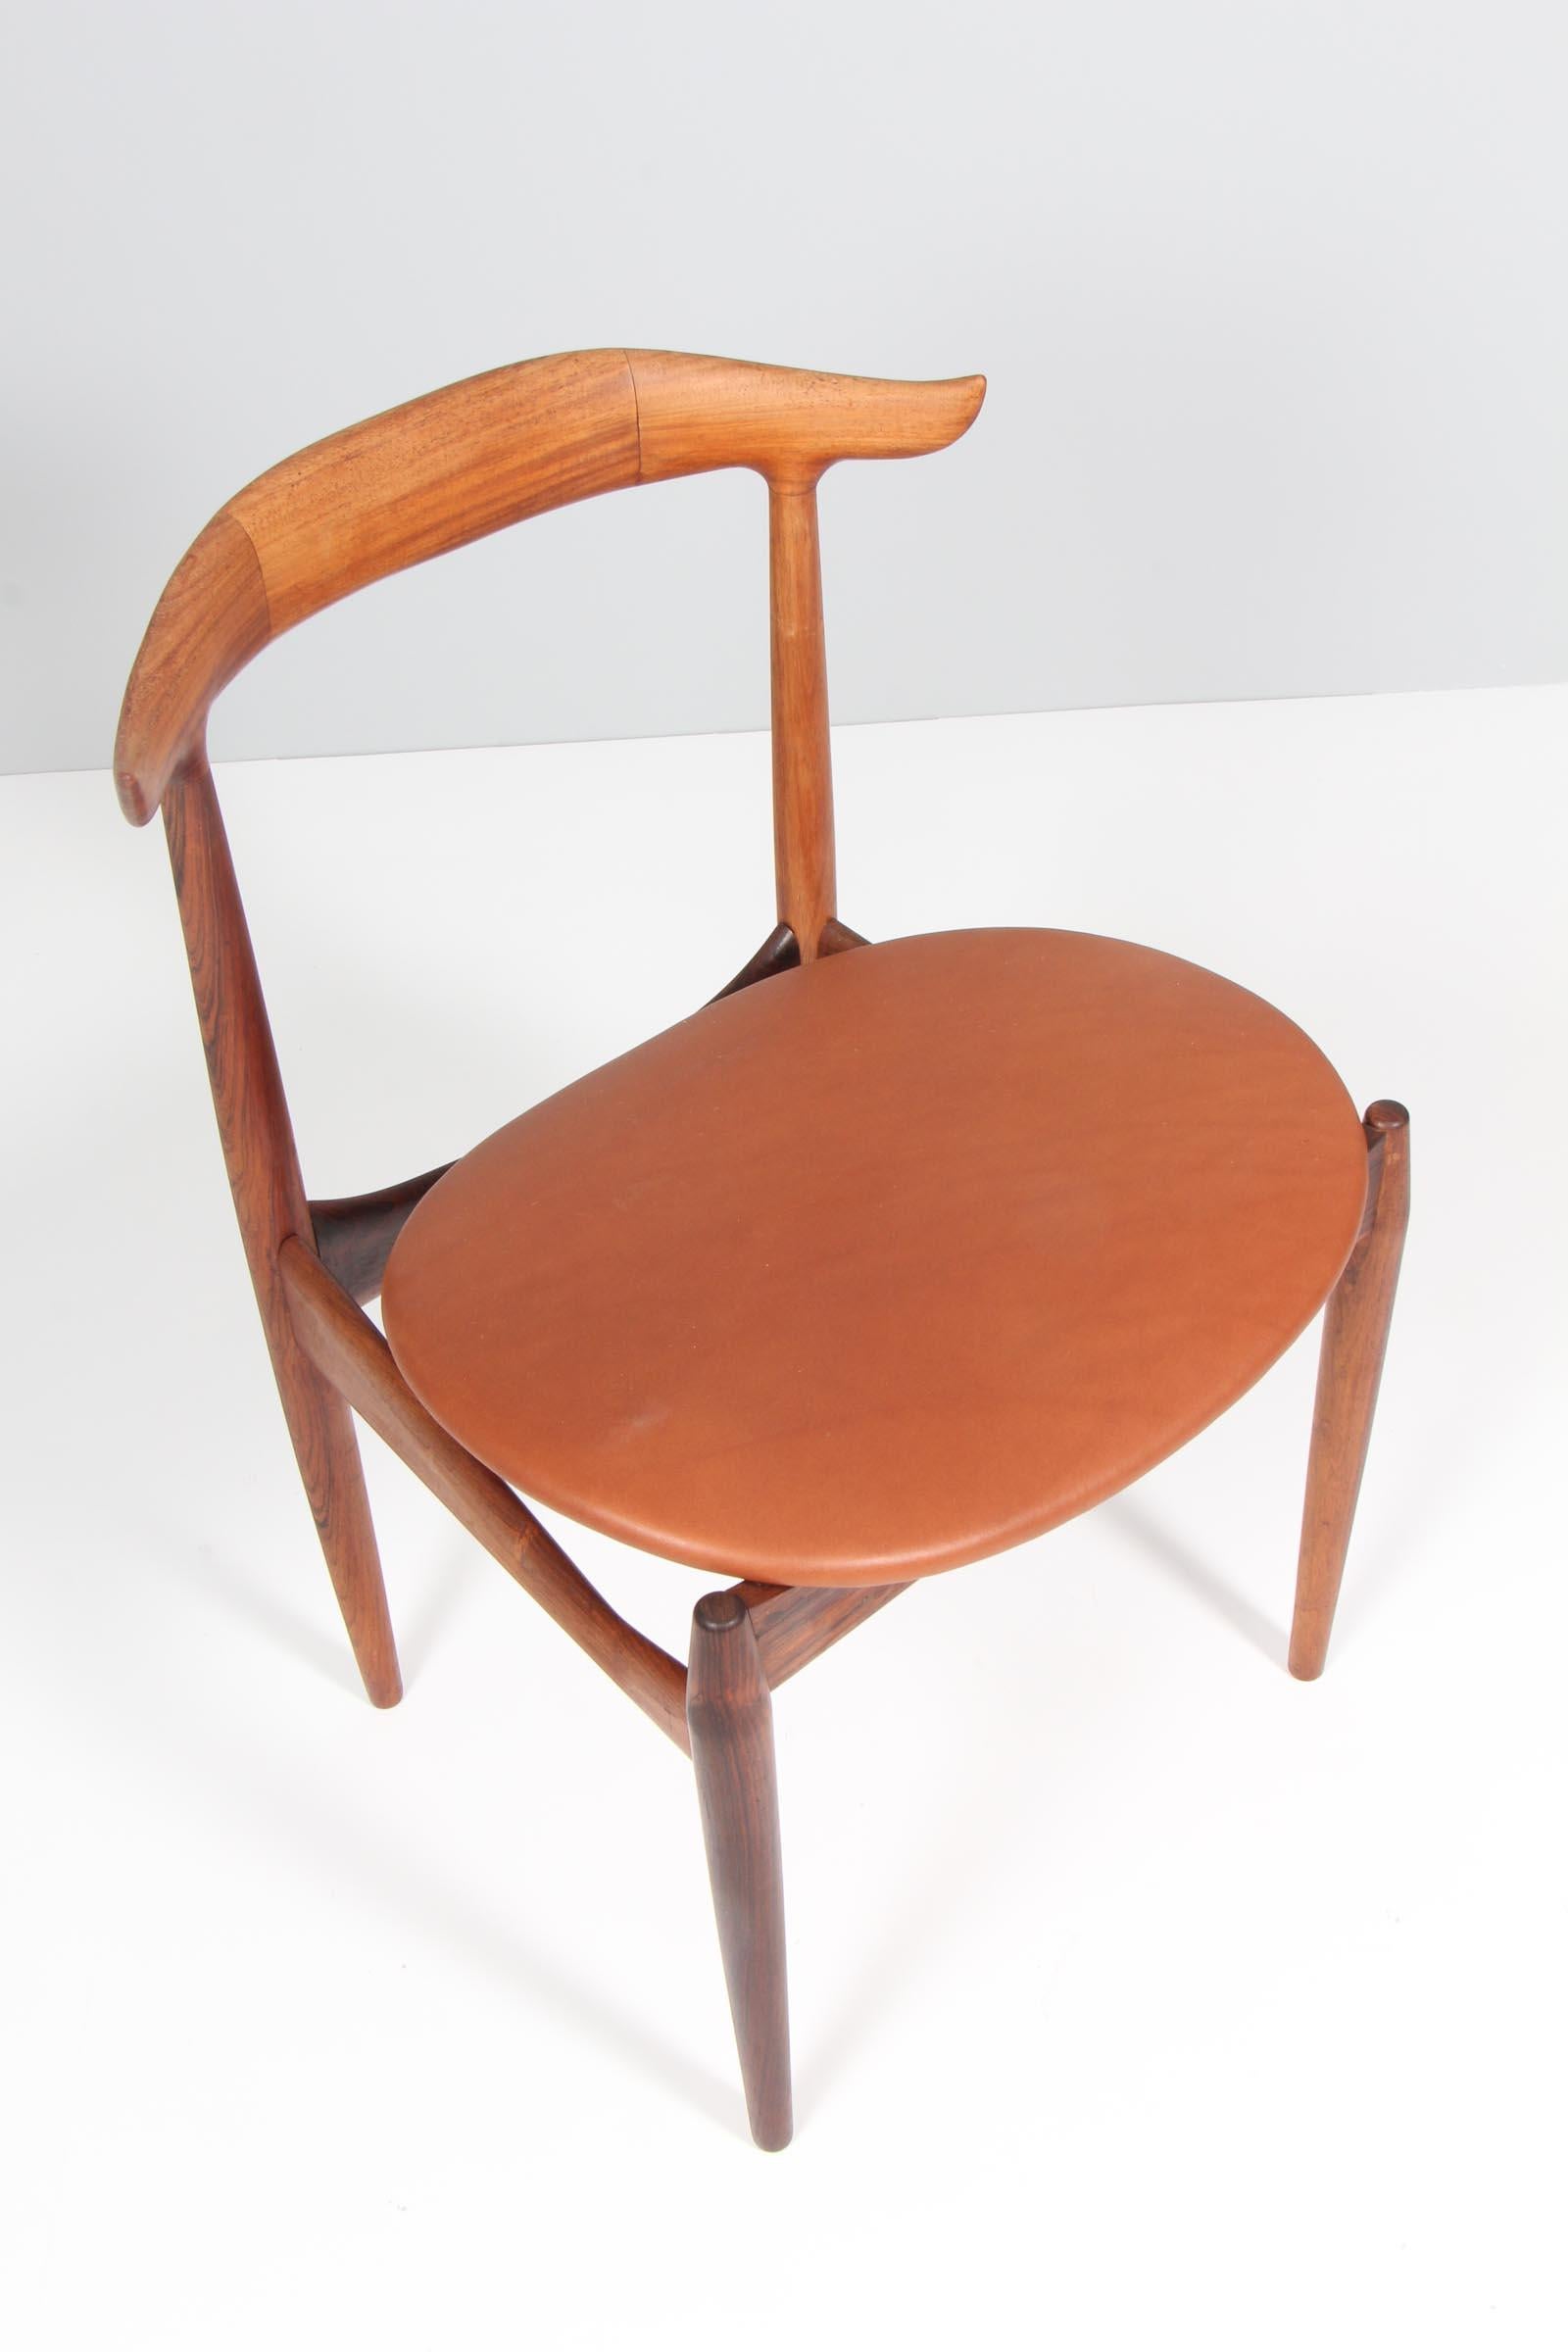 Knud Færch cowhorn arm chair in solid rosewood. 

New upholstered with aniline leather.

Model 215 by Slagelse Møbelværk.